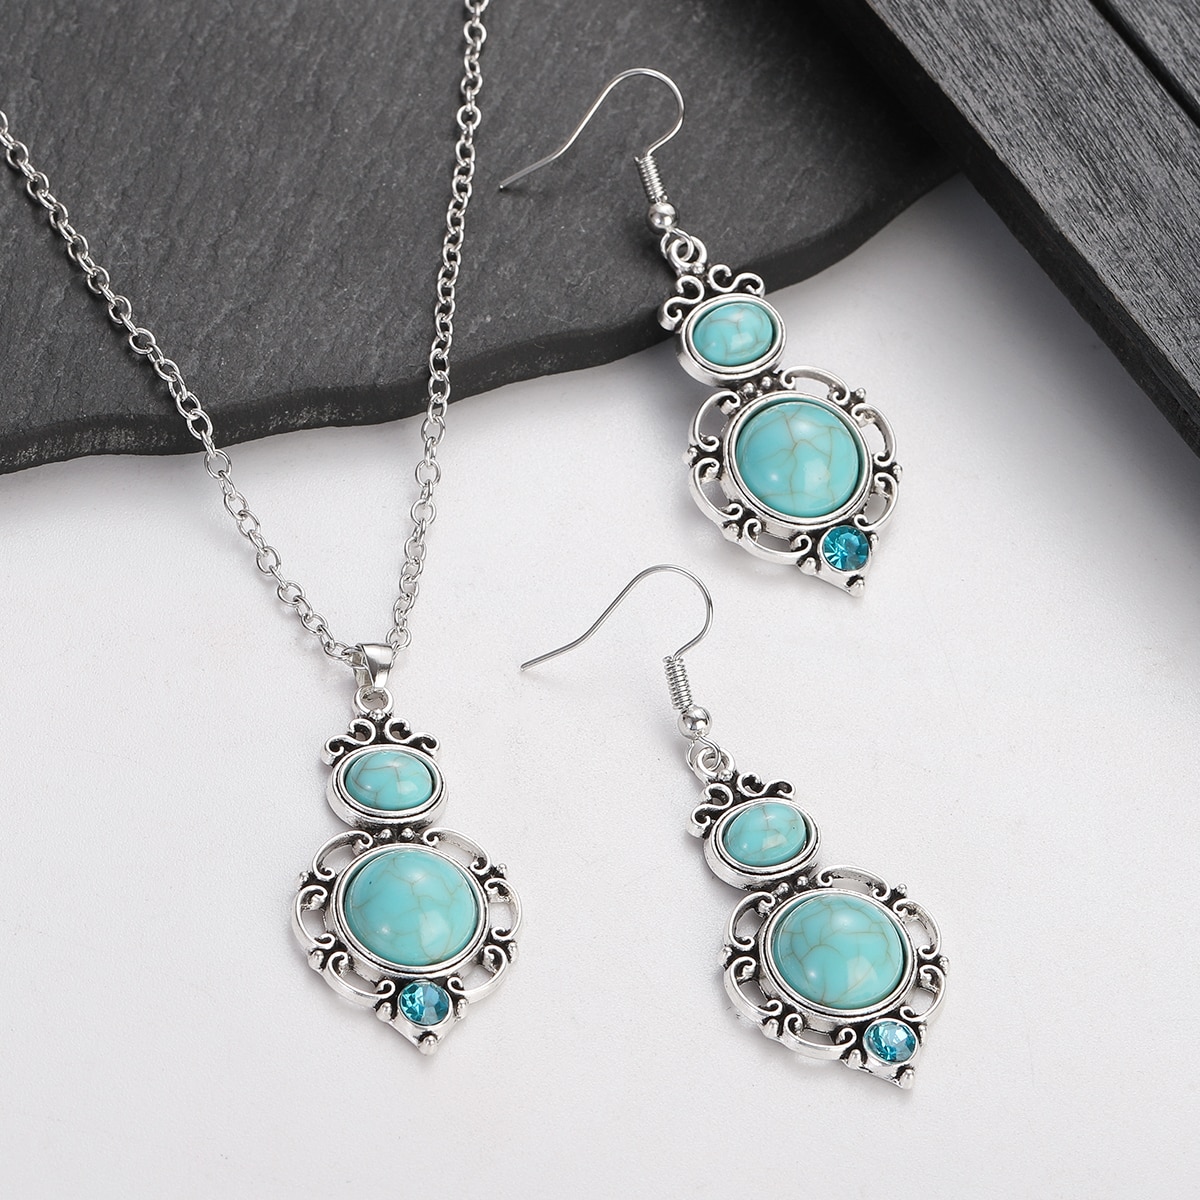 Ethnic-Boho-Red-Blue-Stone-Pendant-Necklace-Earring-Set-Women-Girls-Silver-Color-Geometric-Jewelry-S-1005004921122202-5